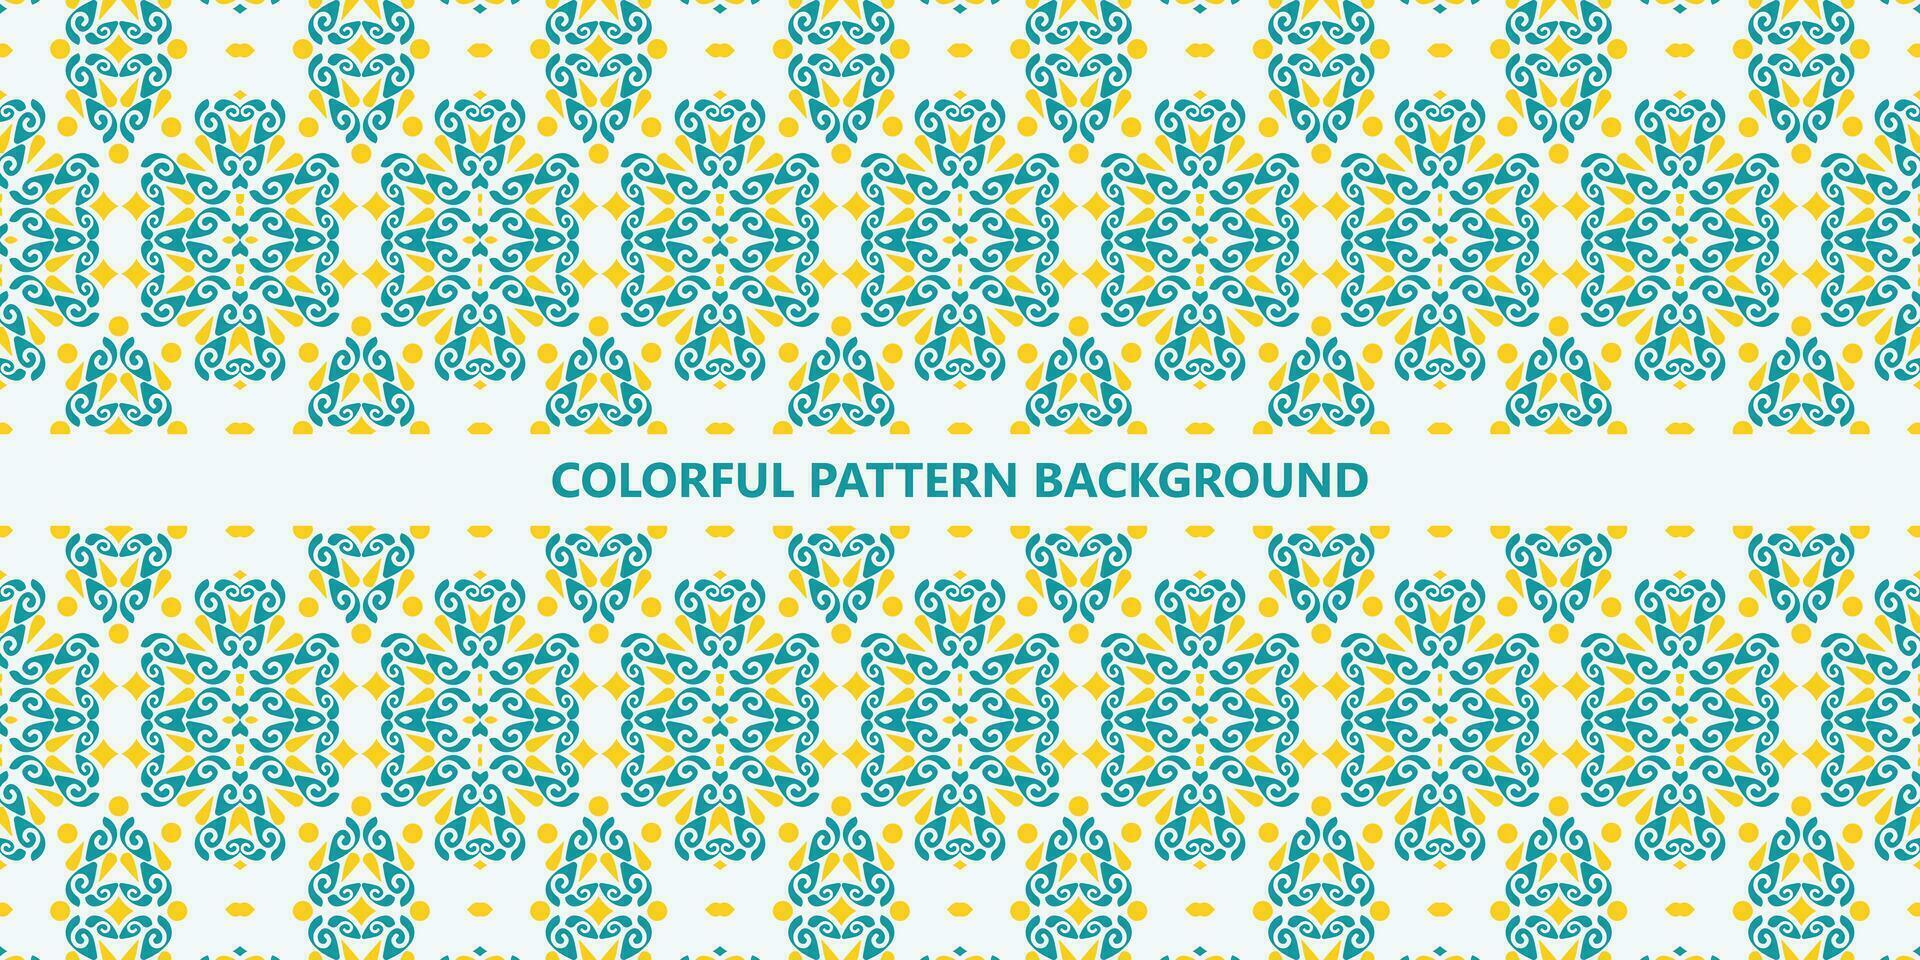 Colorful abstract geometric pattern design vector